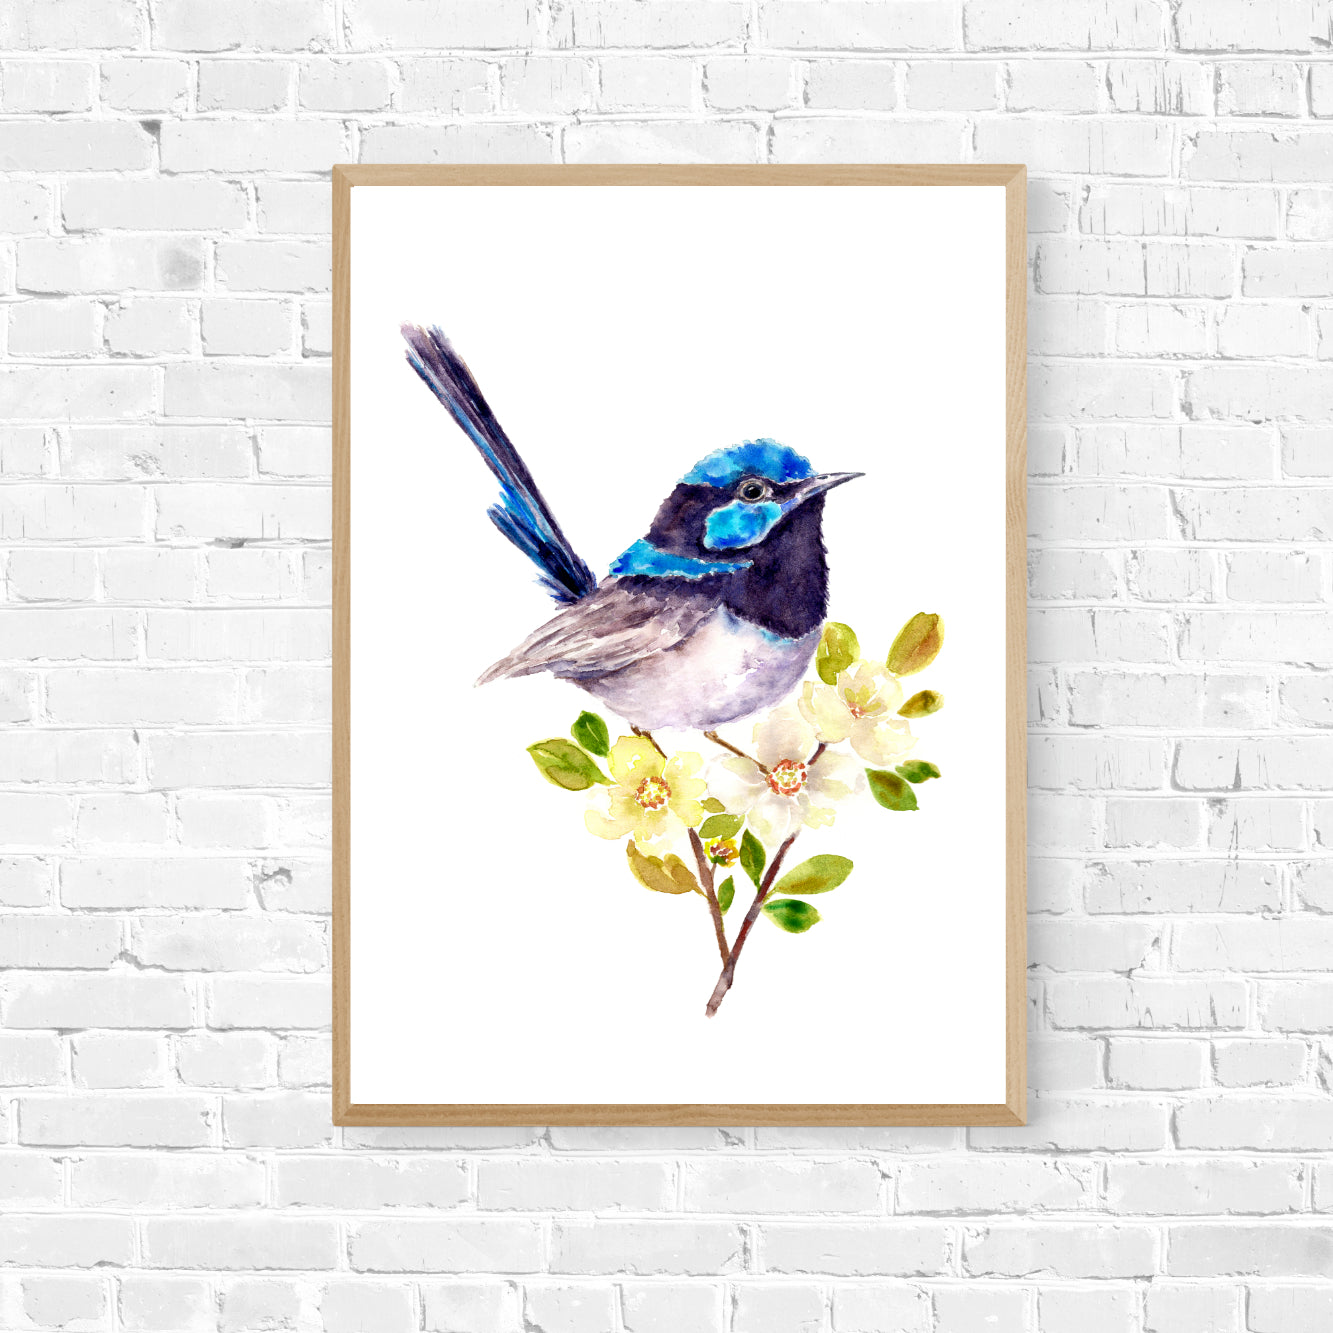 Dressed up in Blue - Limited Edition Archival Print Wholesale